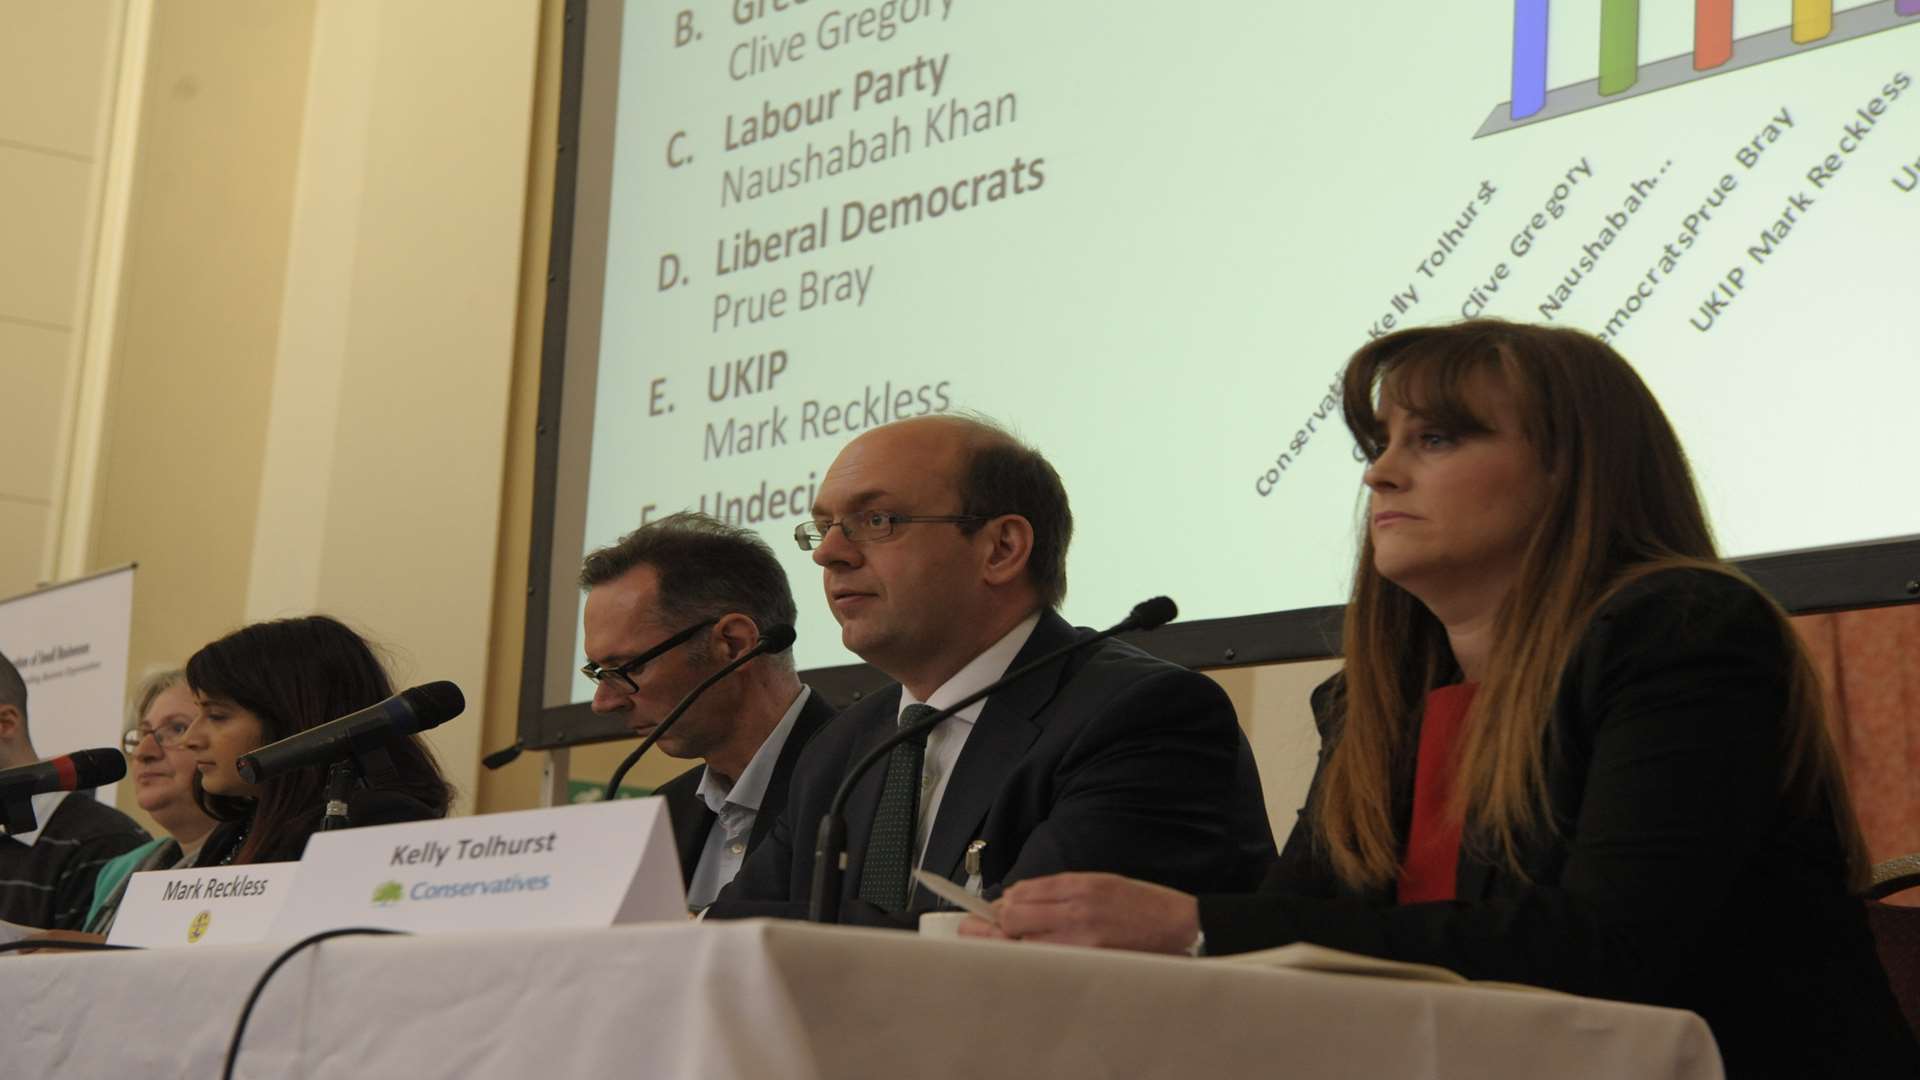 From right, Kelly Tolhurst, Mark Reckless, Paul Francis and Naushabah Khan at the election hustings